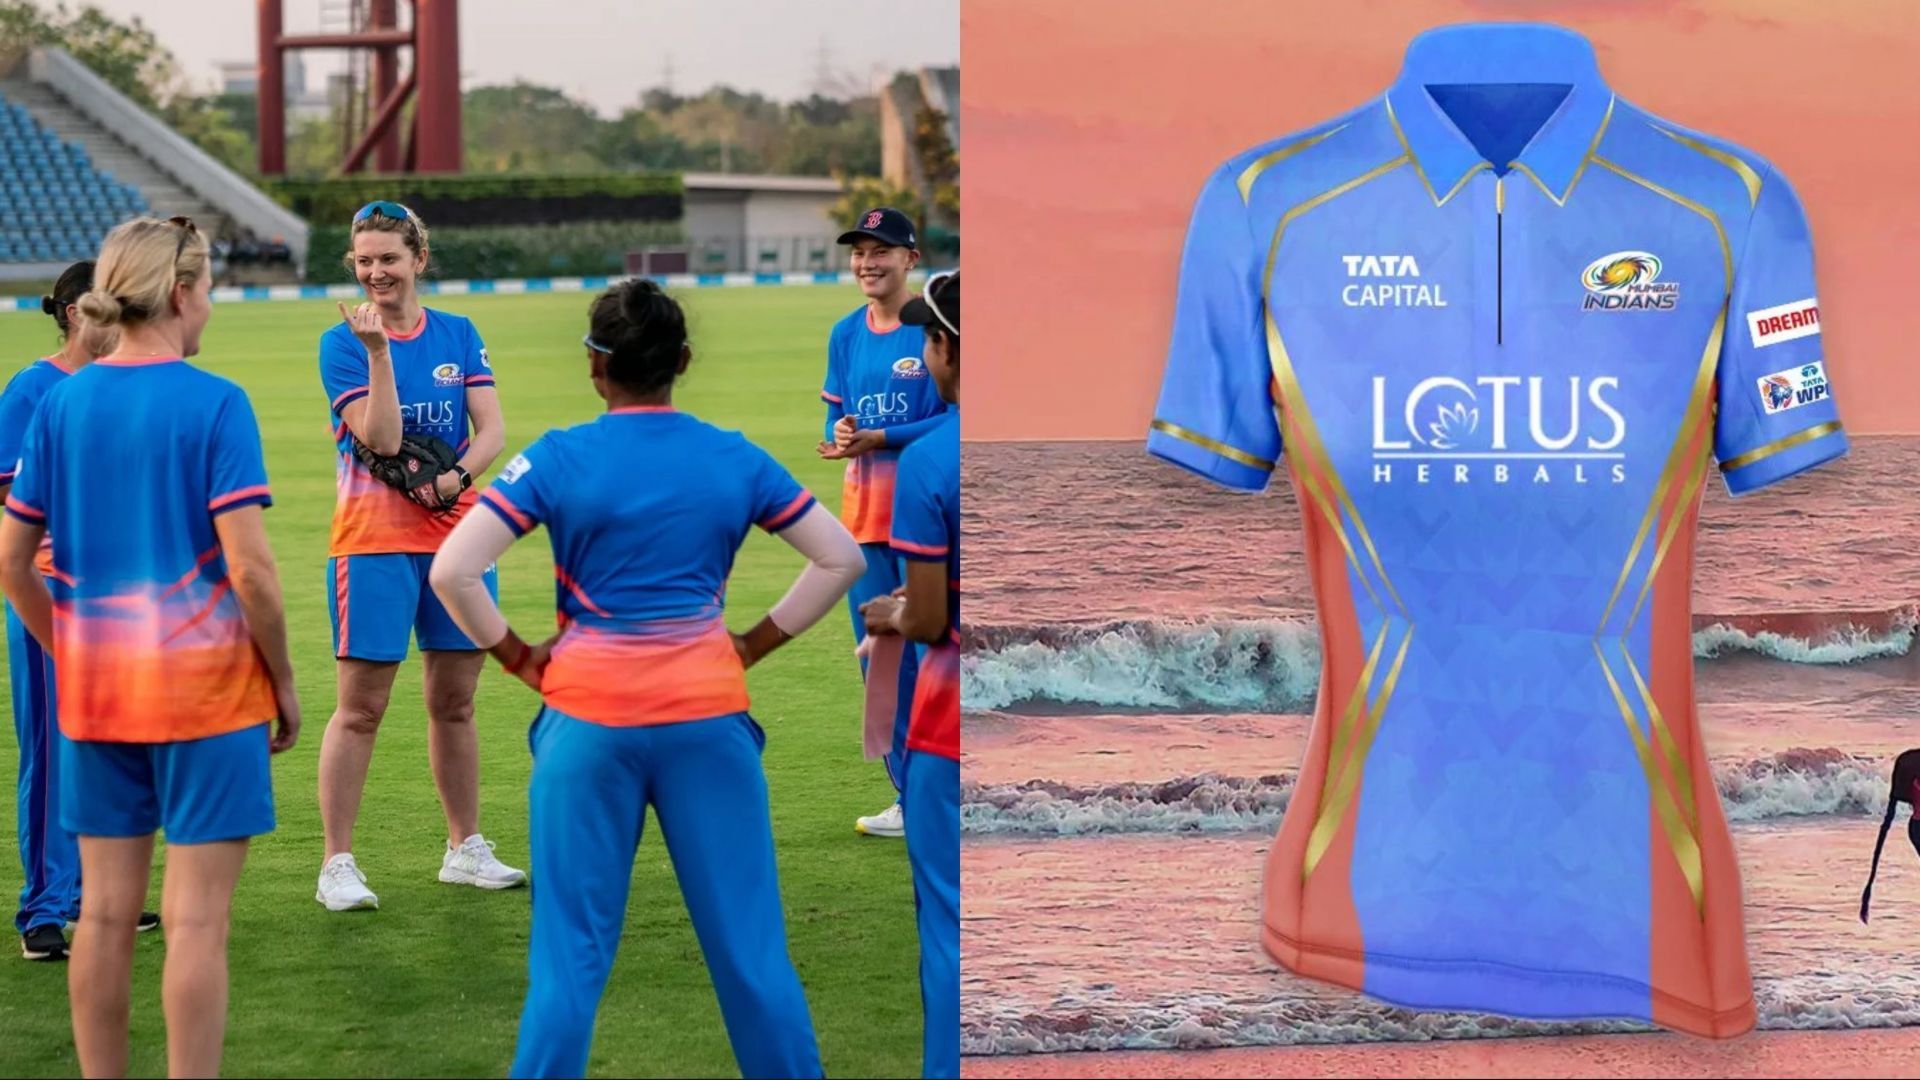 Mumbai Indians will don this jersey in WPL 2023 (Image: Instagram)